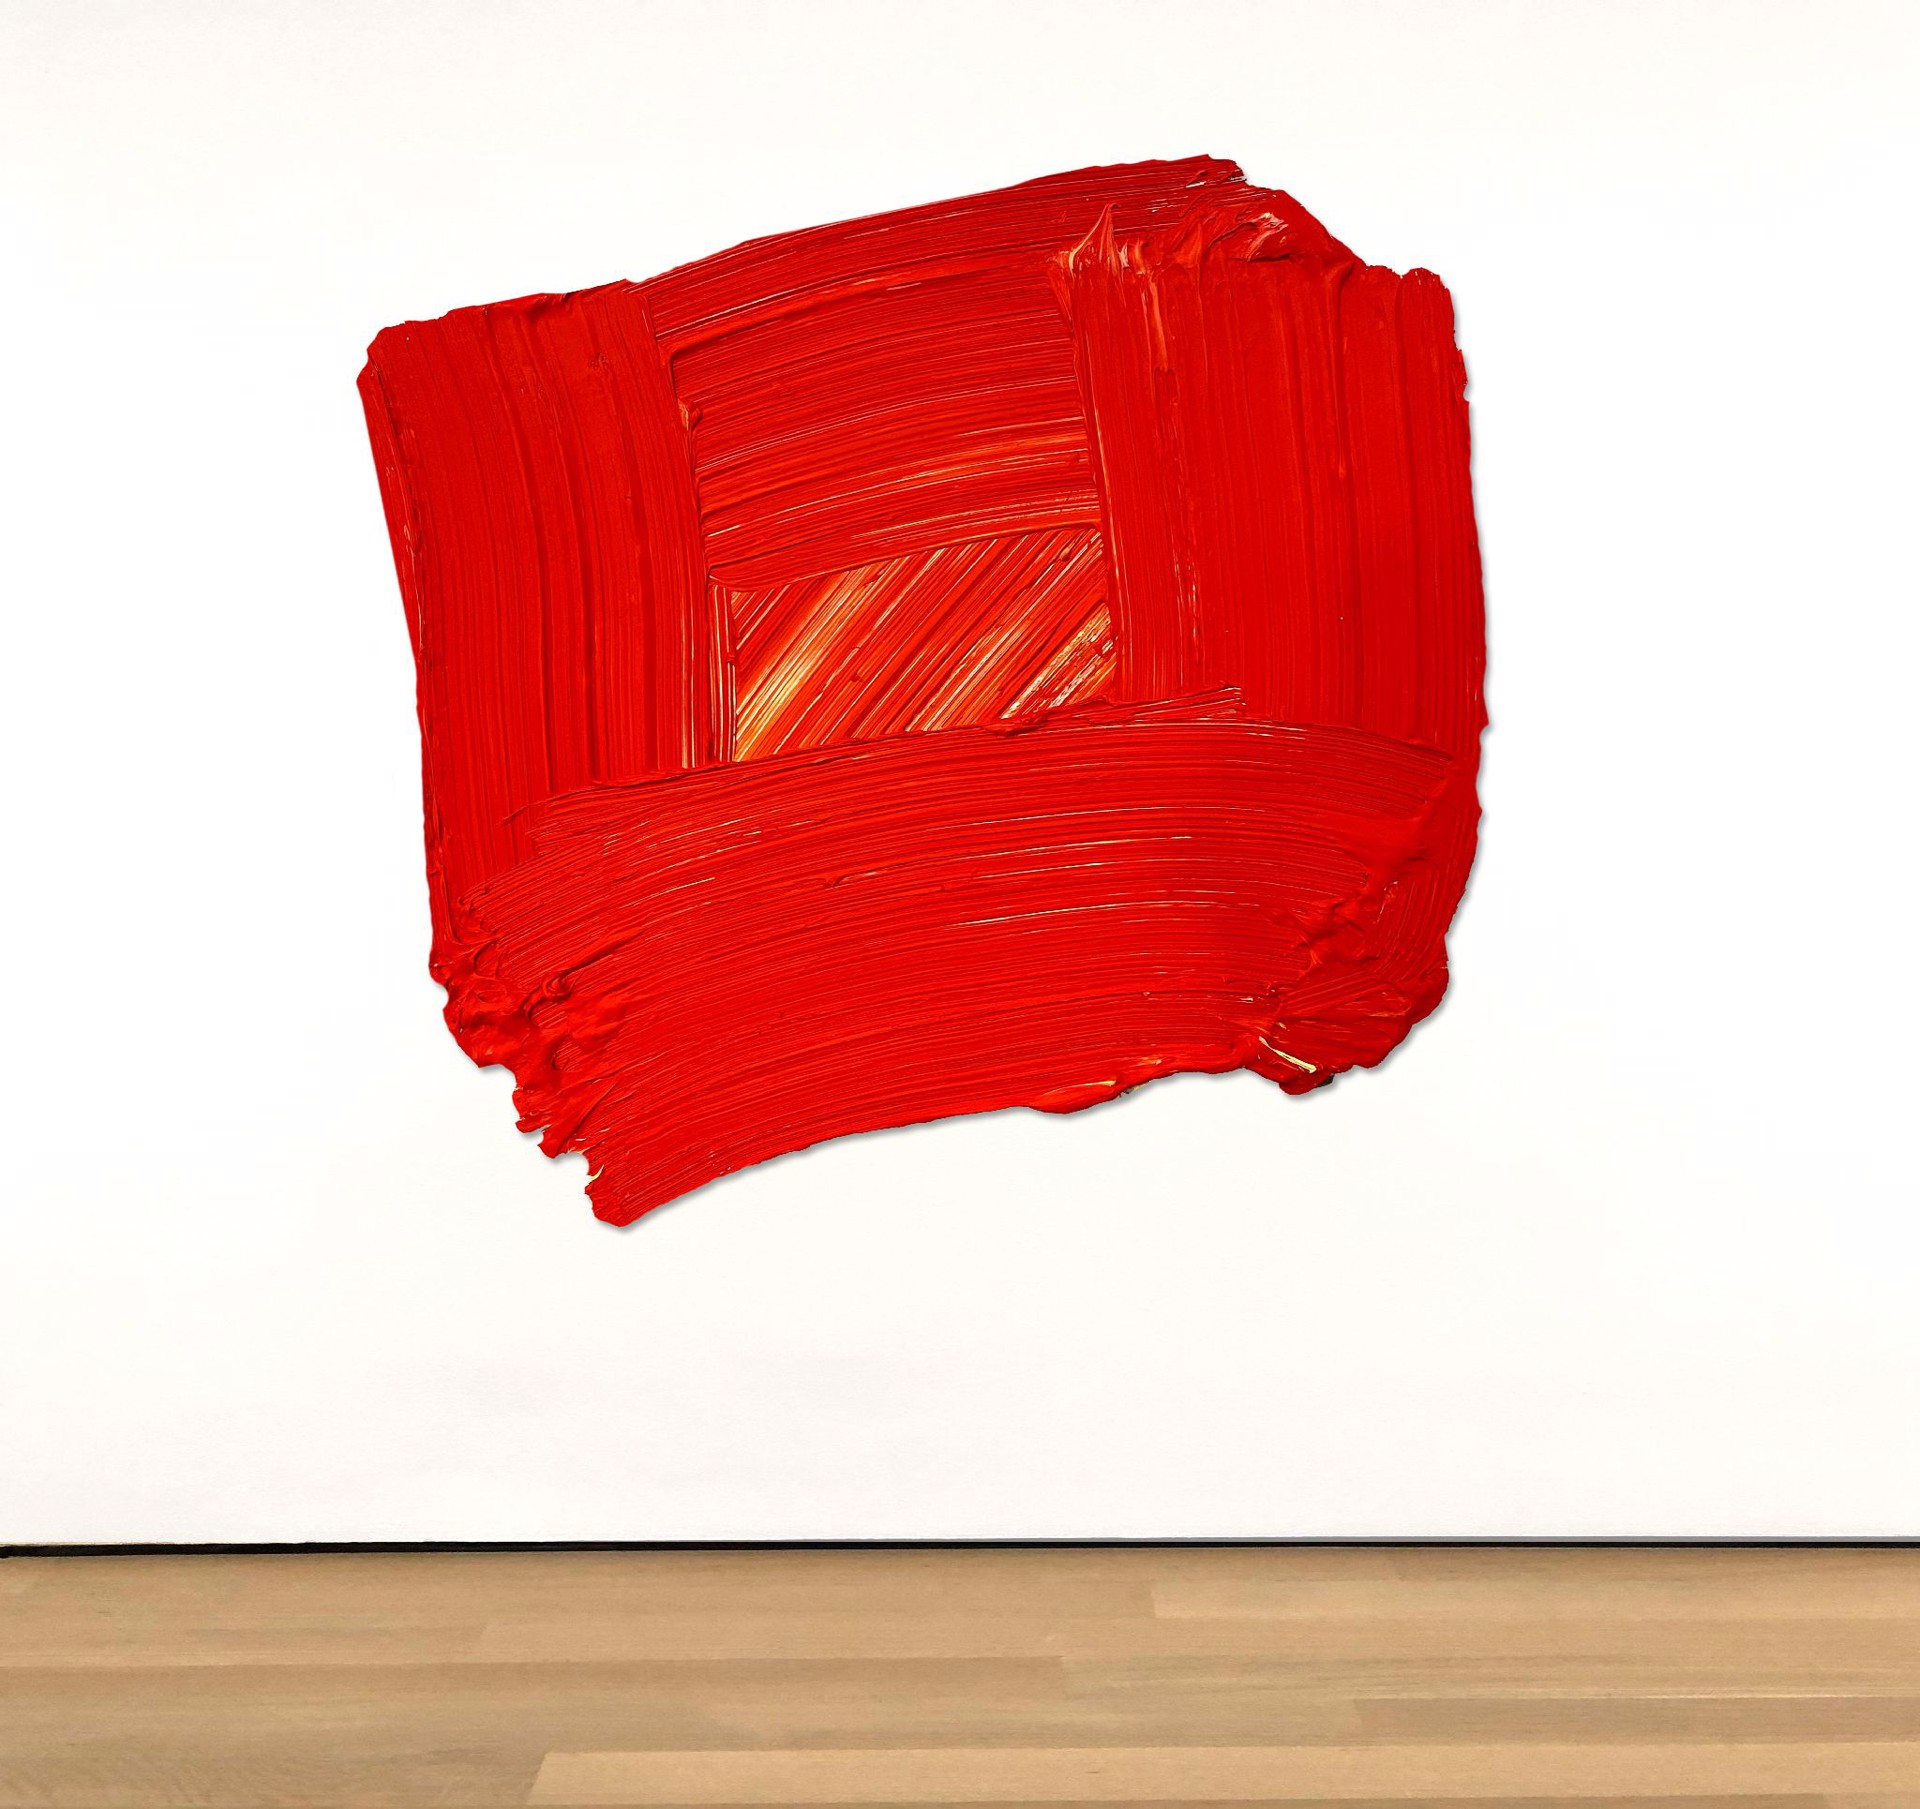 Untitled III by Donald Martiny